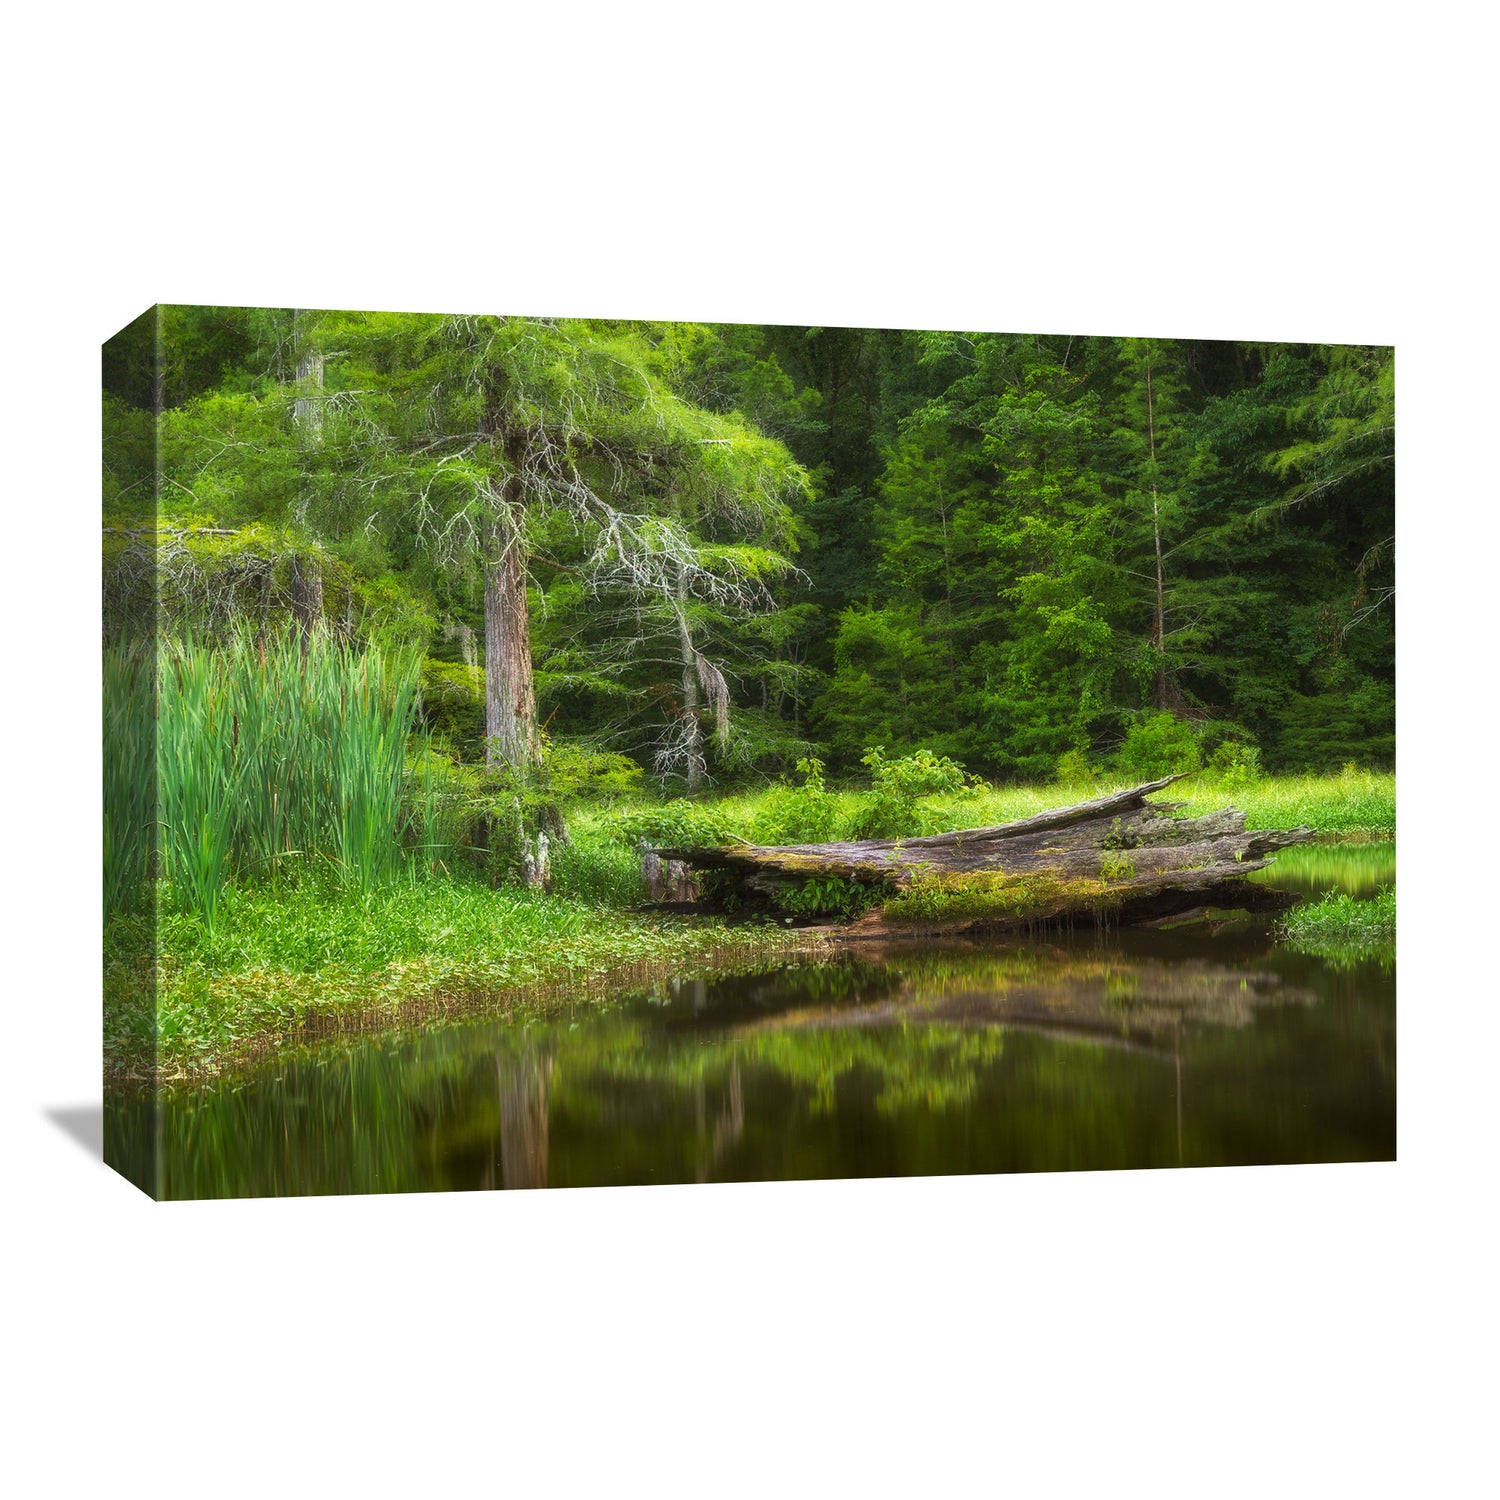 Canvas wall art featuring a Mississippi Delta lake